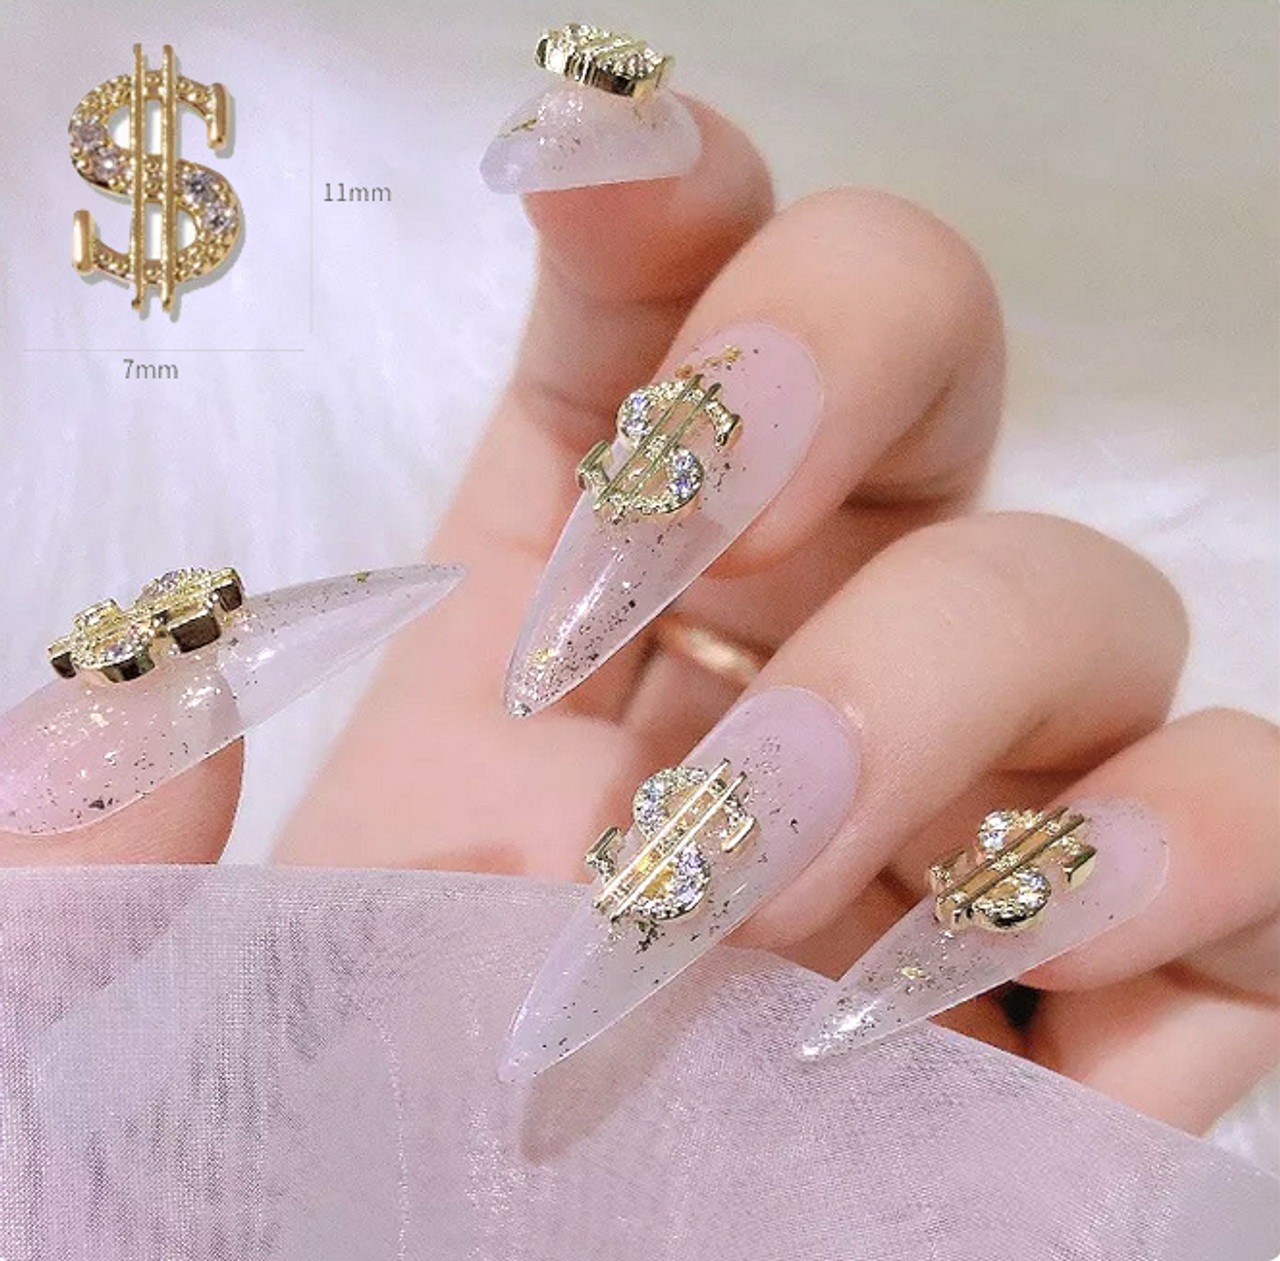 3d Luxury Nail Art Rhinestones And Charms Large Crystals Diamonds